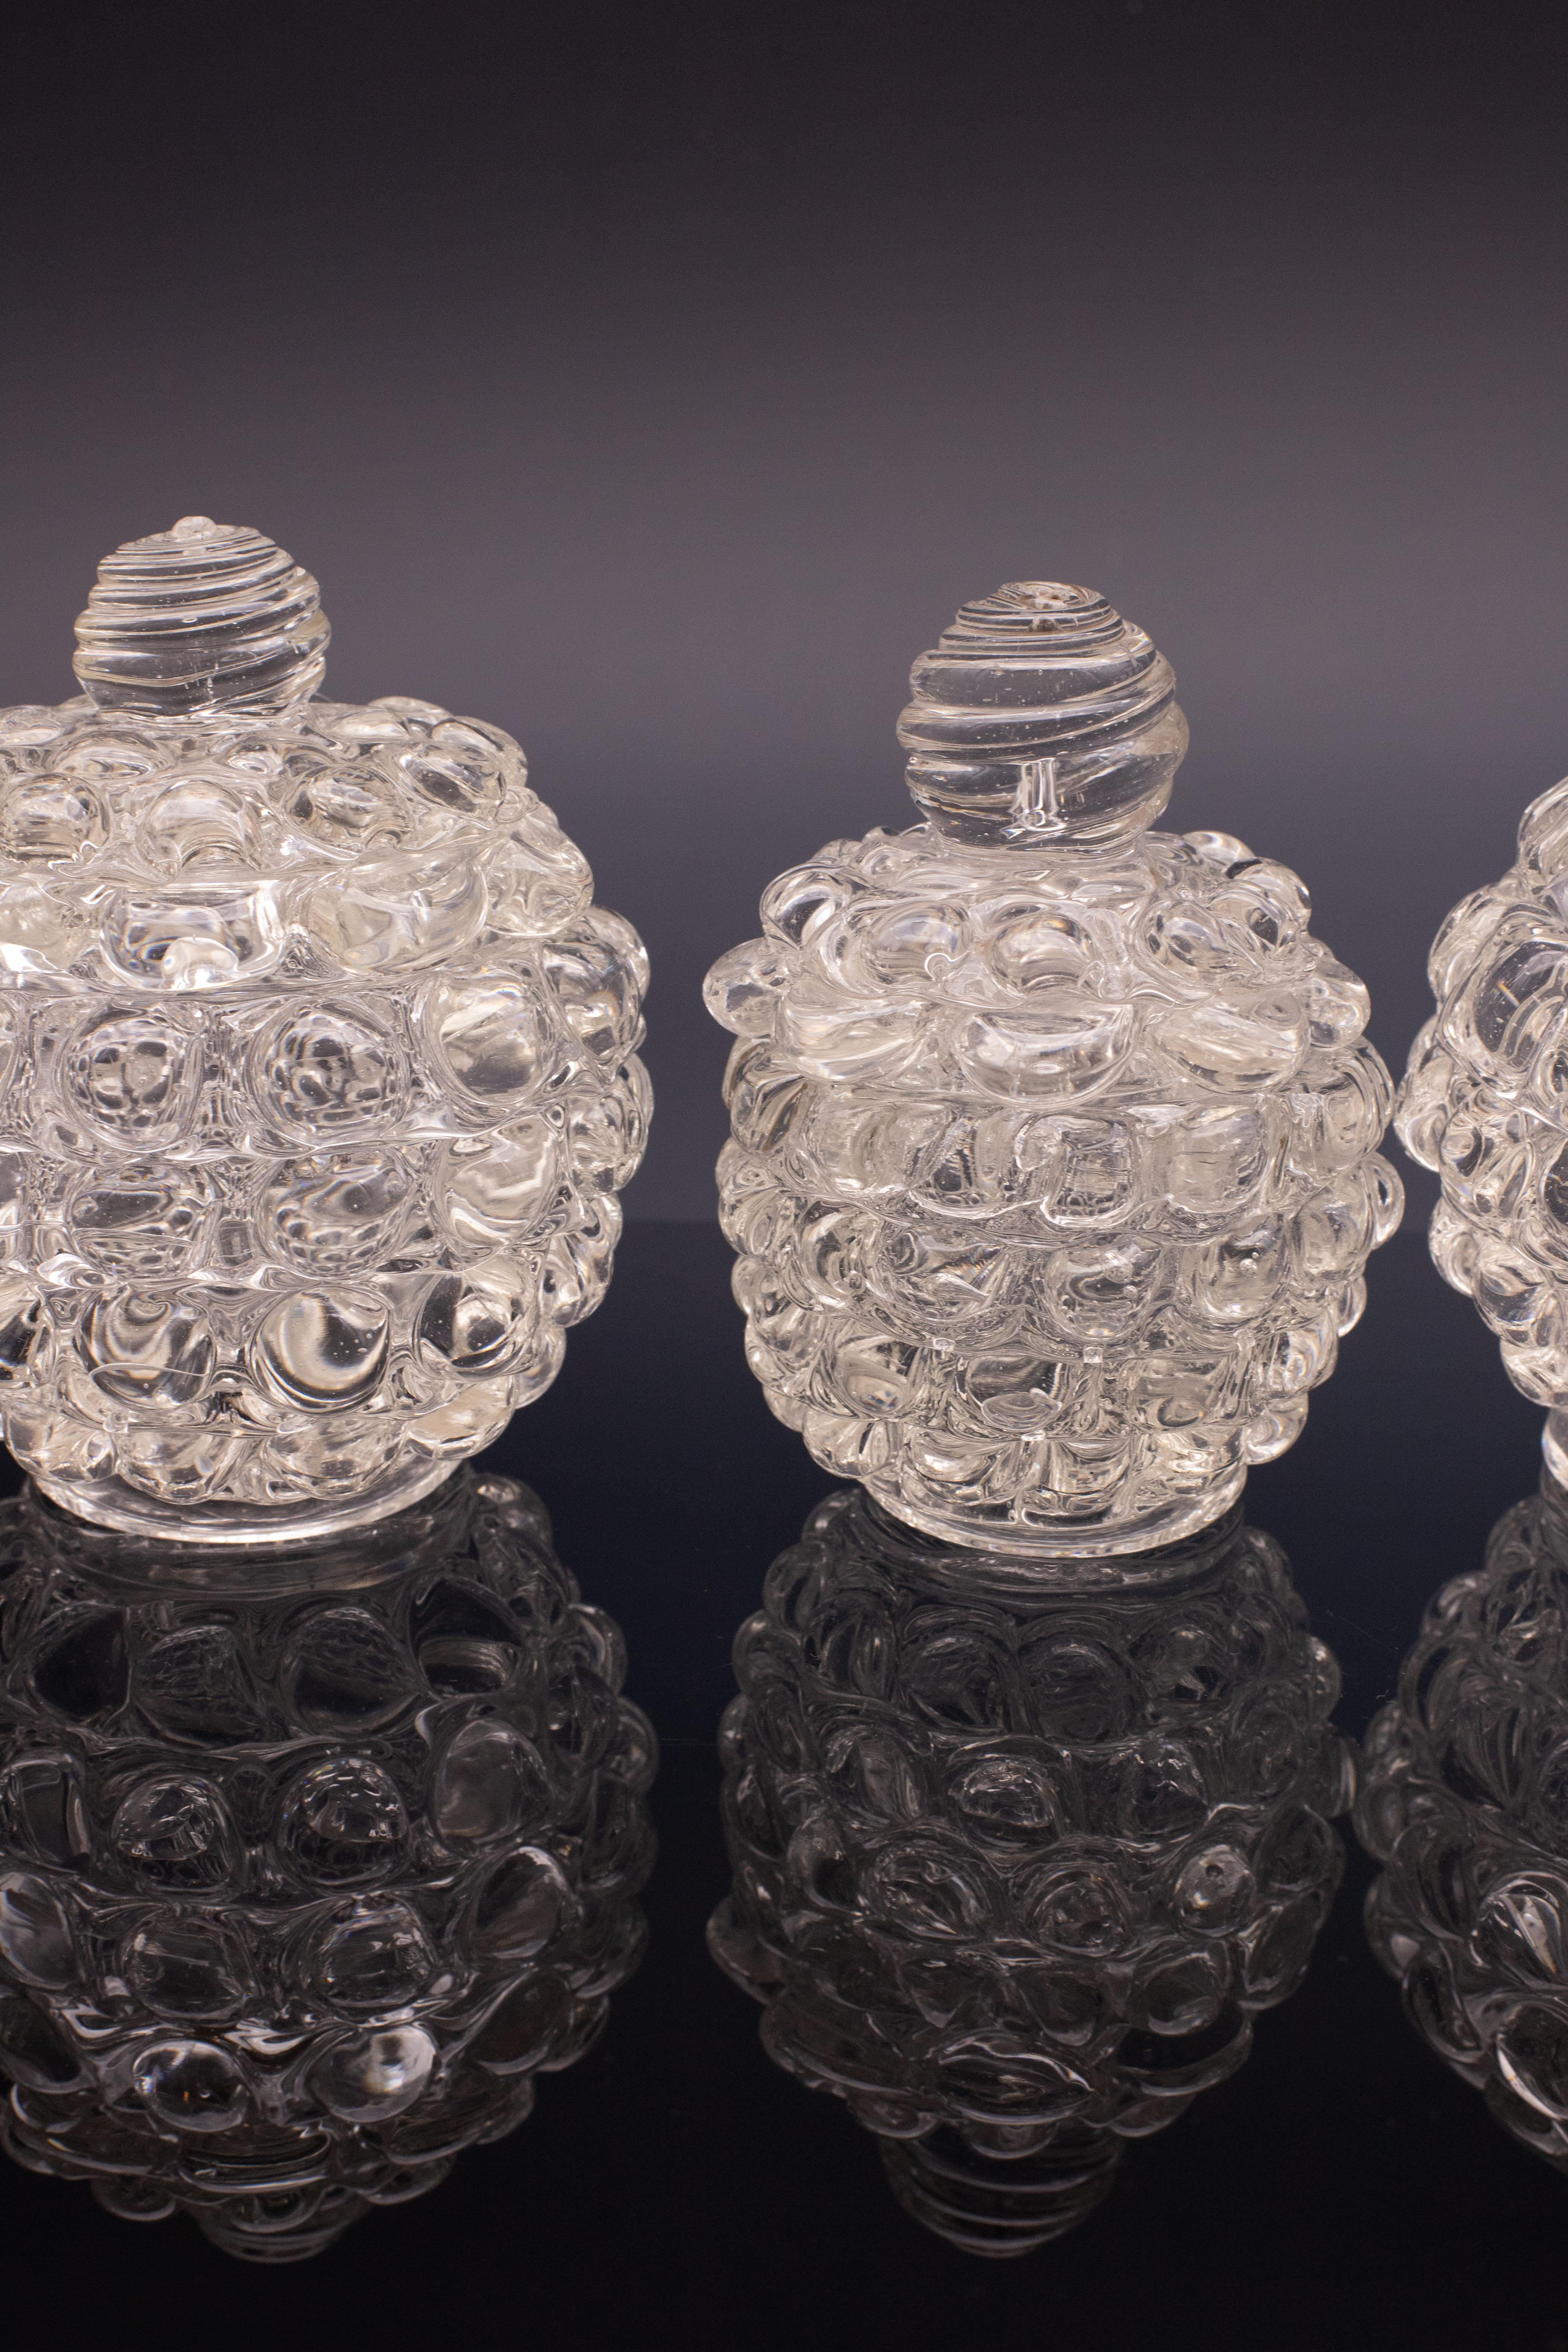 Set of 3 Series Lenti Vase Barovier & Toso Italy, Murano Glass, 1940s For Sale 9